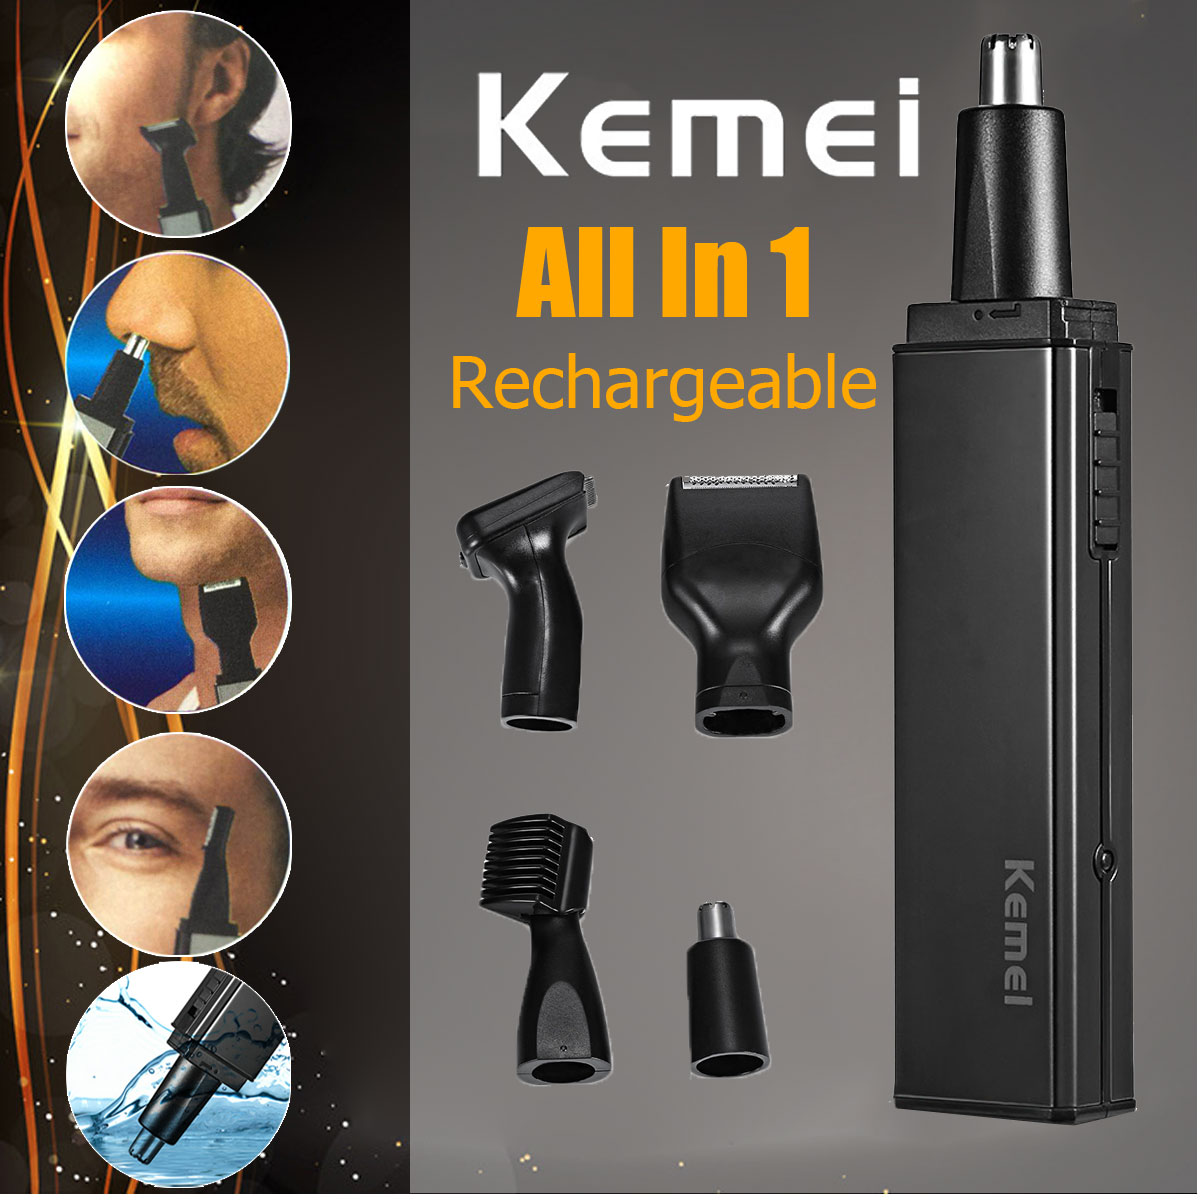 Kemei-4-in-1-Nose-Hair-Beard-Eyebrow-Rechargeable-Electric-Trimmer-Electric-Nose-Trimmer-Ear-Shaver-1409747